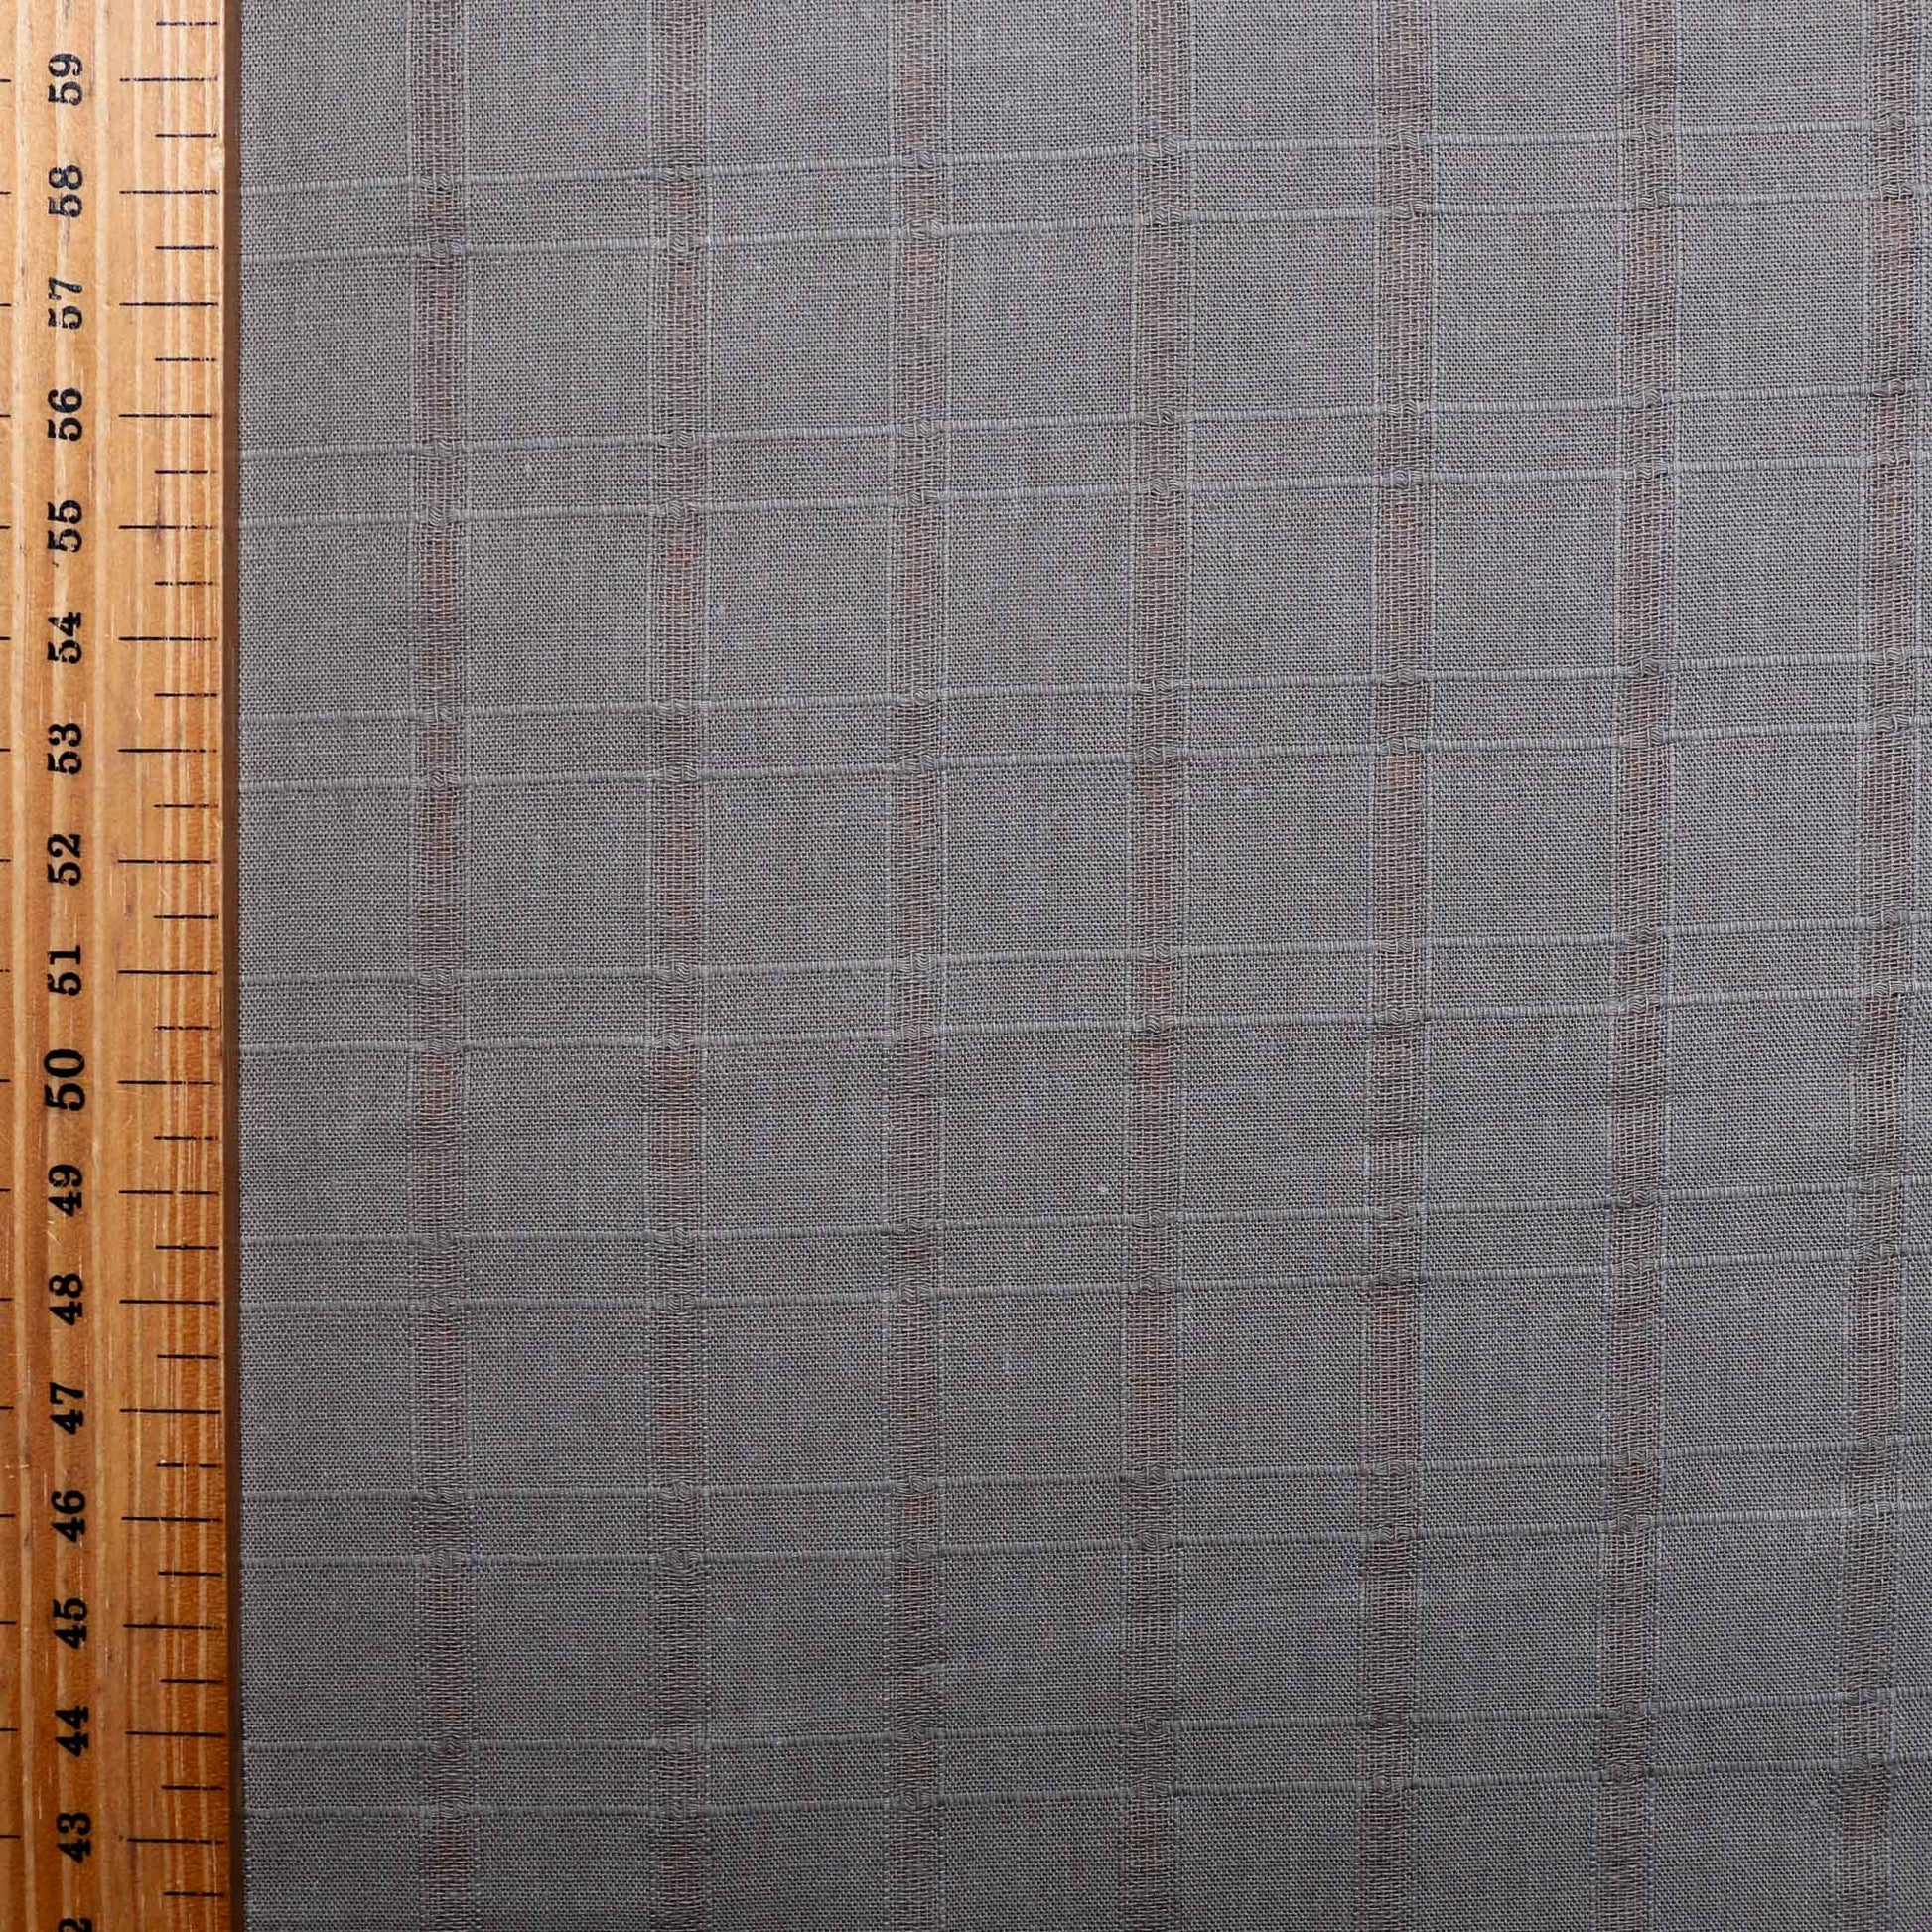 metre of brown cotton dressmaking fabric with jacquard check pattern